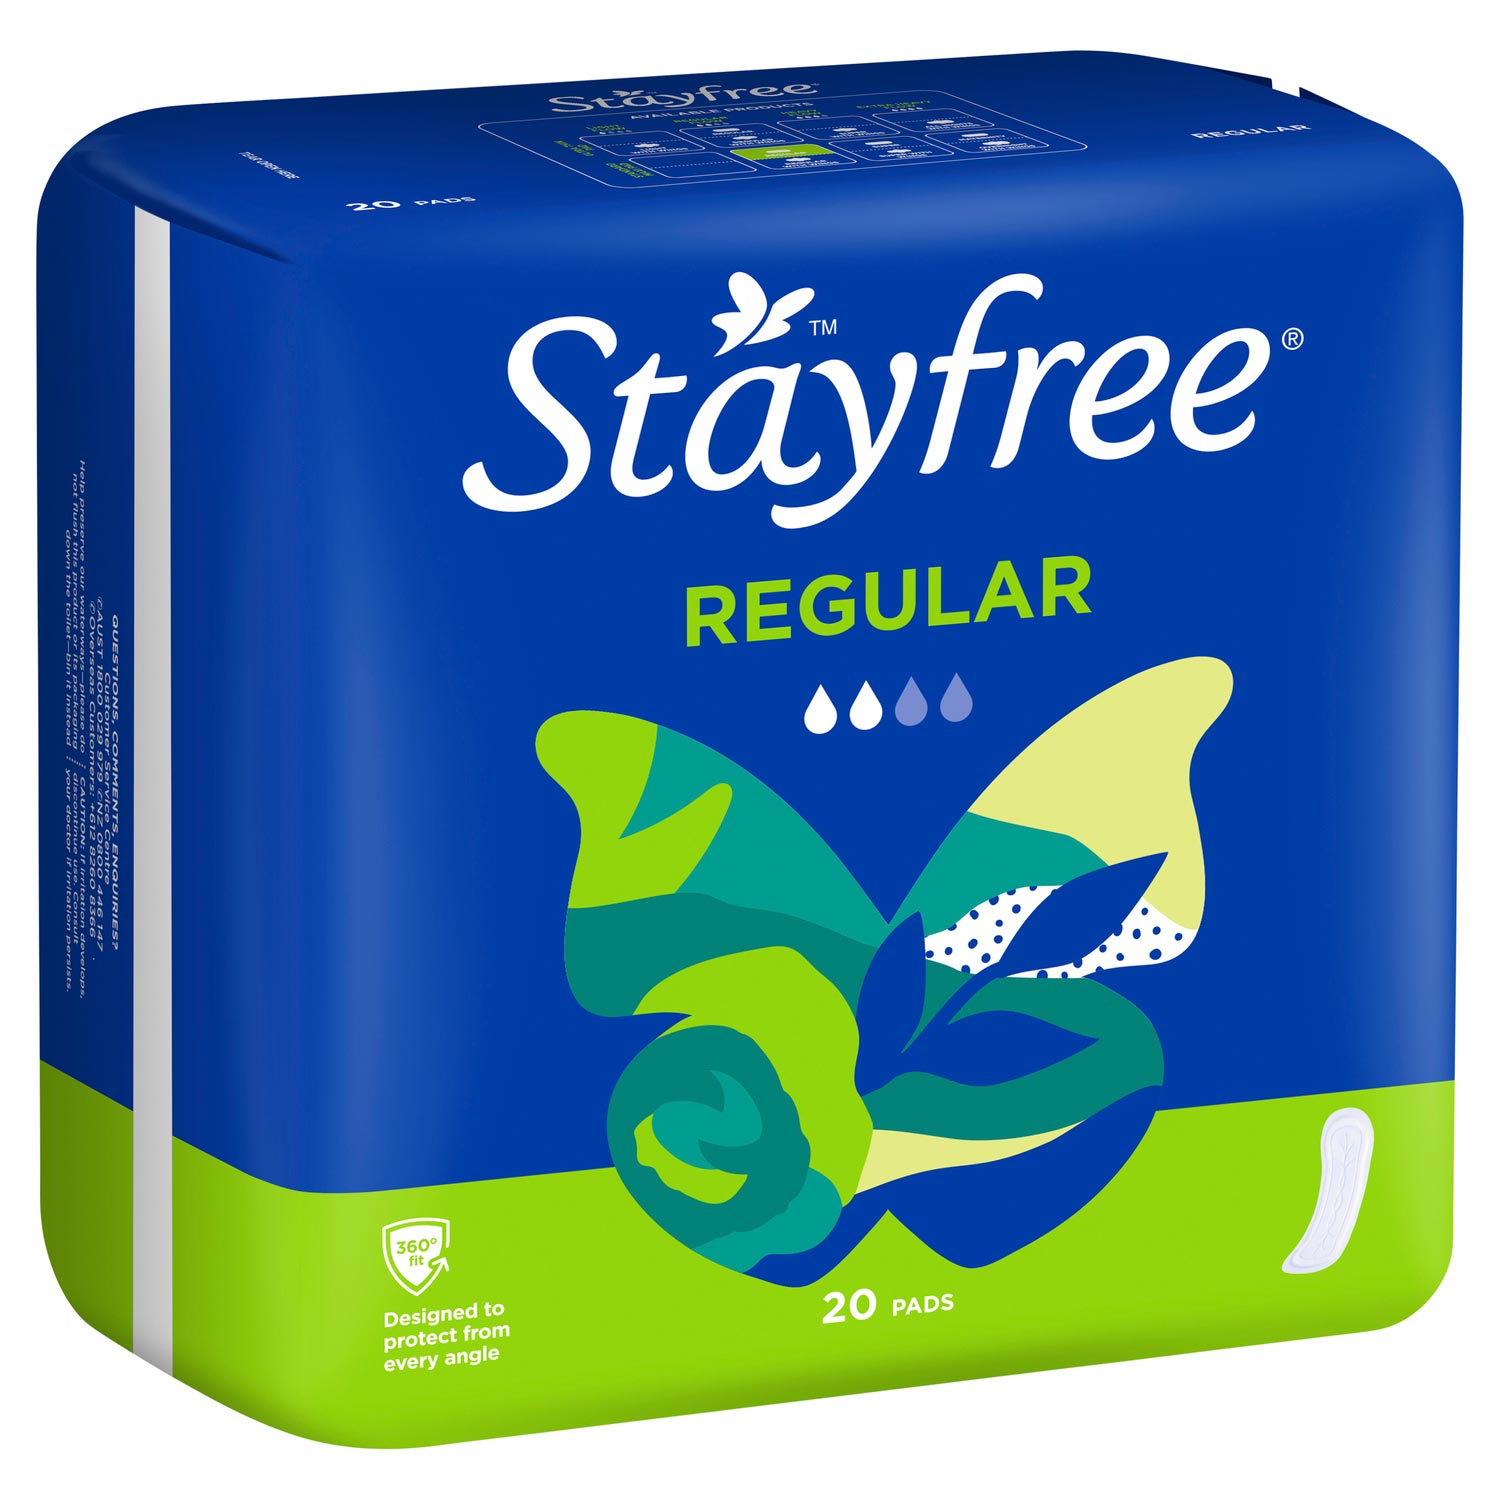 https://www.stayfree.com.au/sites/stayfree_au/files/product-images/stayfree-regular-no-wings-1.jpg